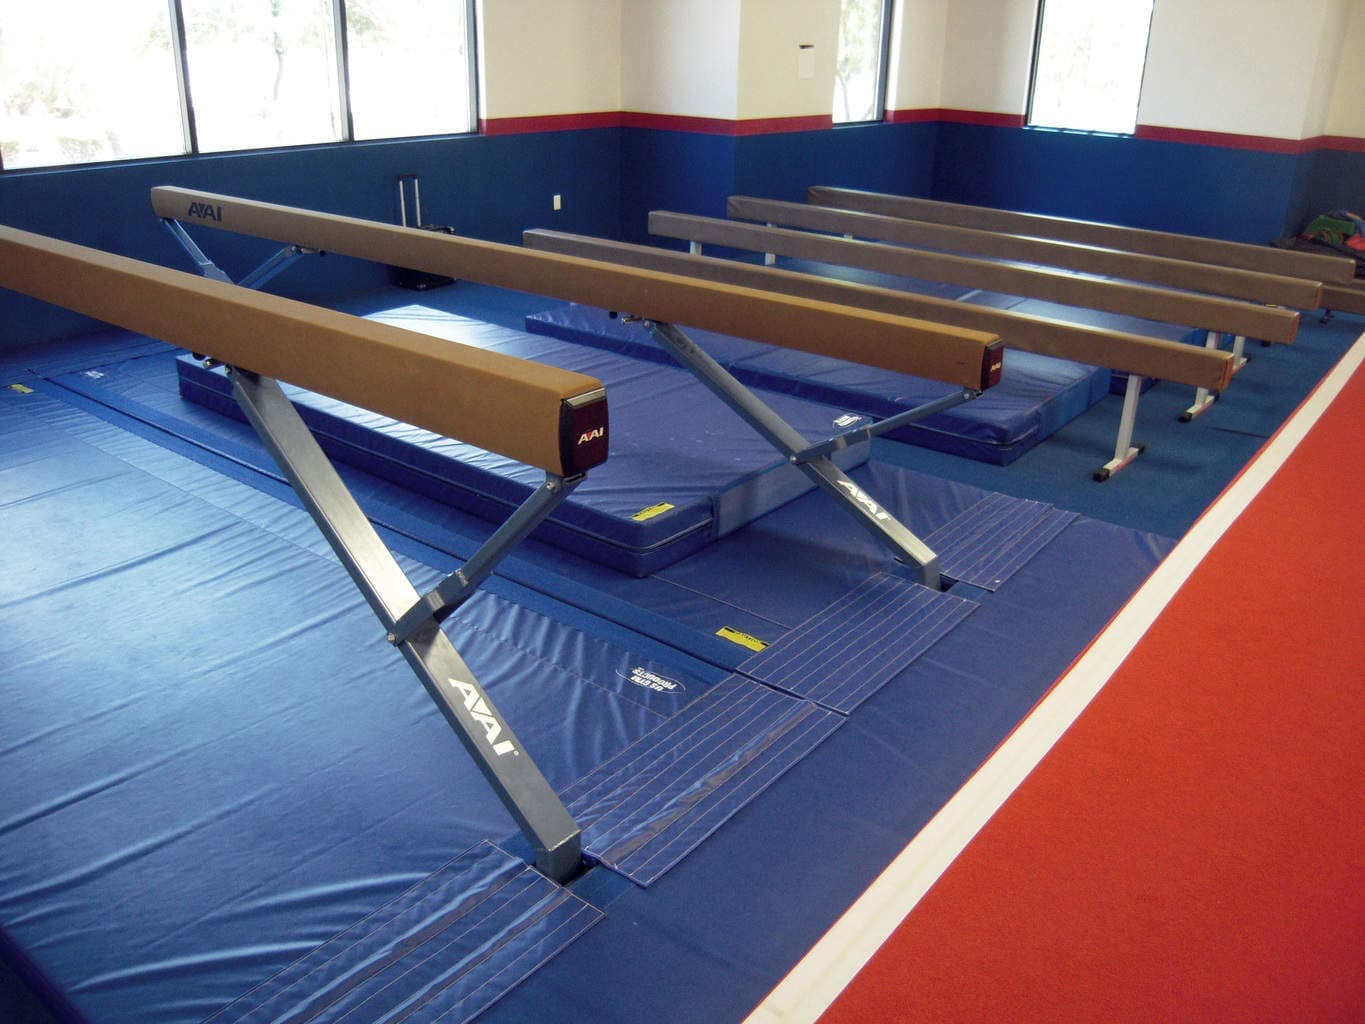 USA Youth Fitness Center Beams